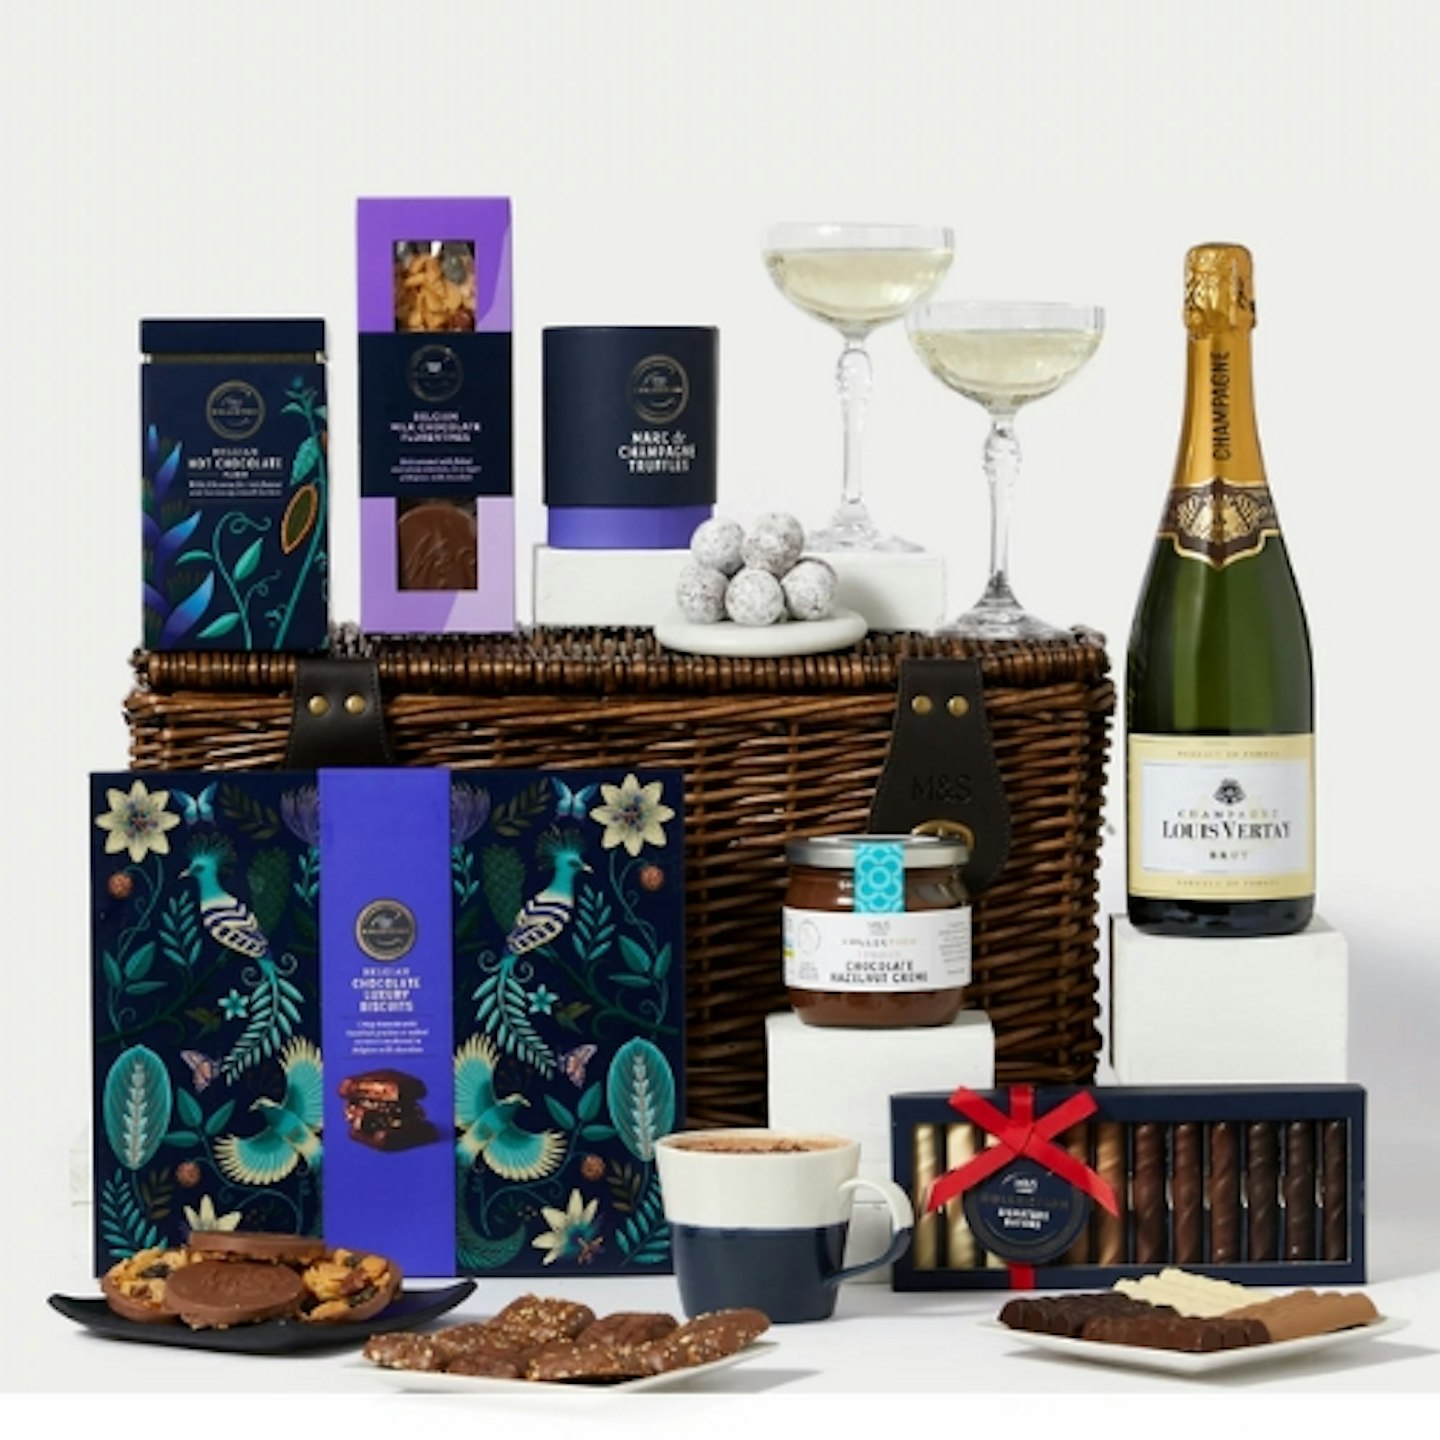 M&S The Collections Chocolate & Champagne Hamper